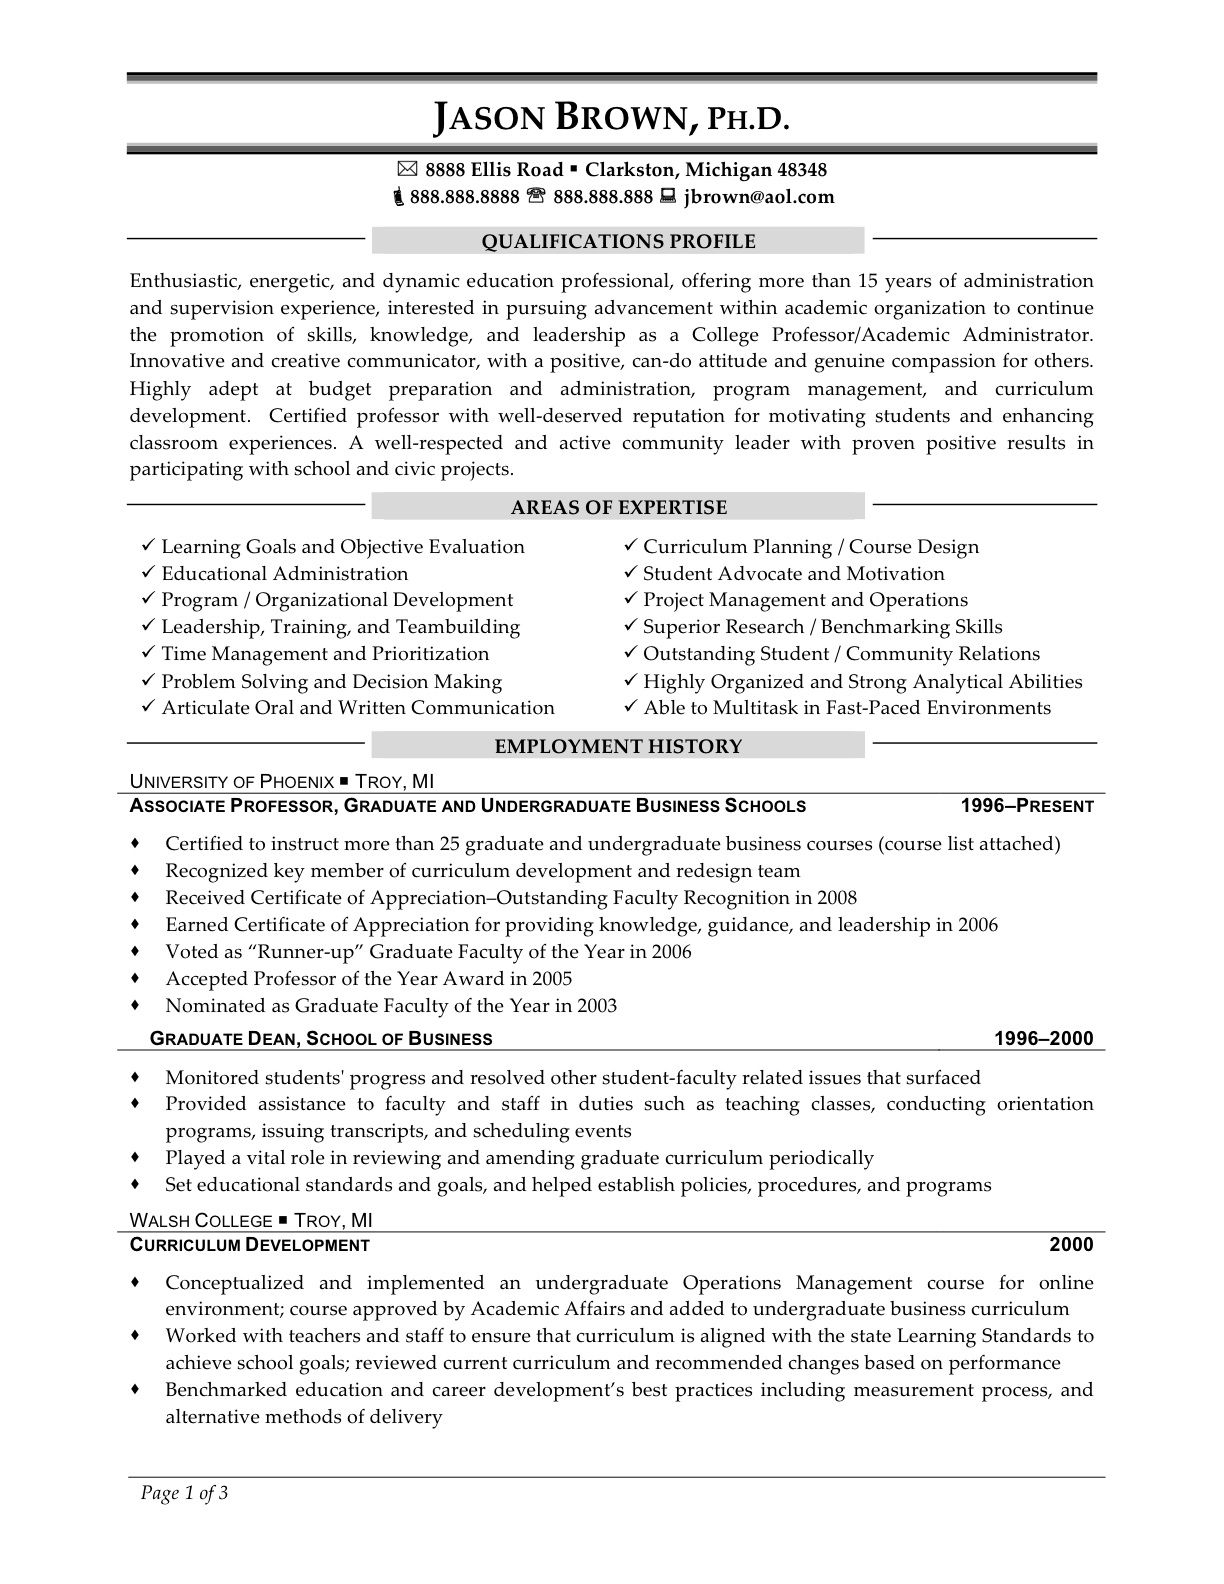 bauer-resume-template